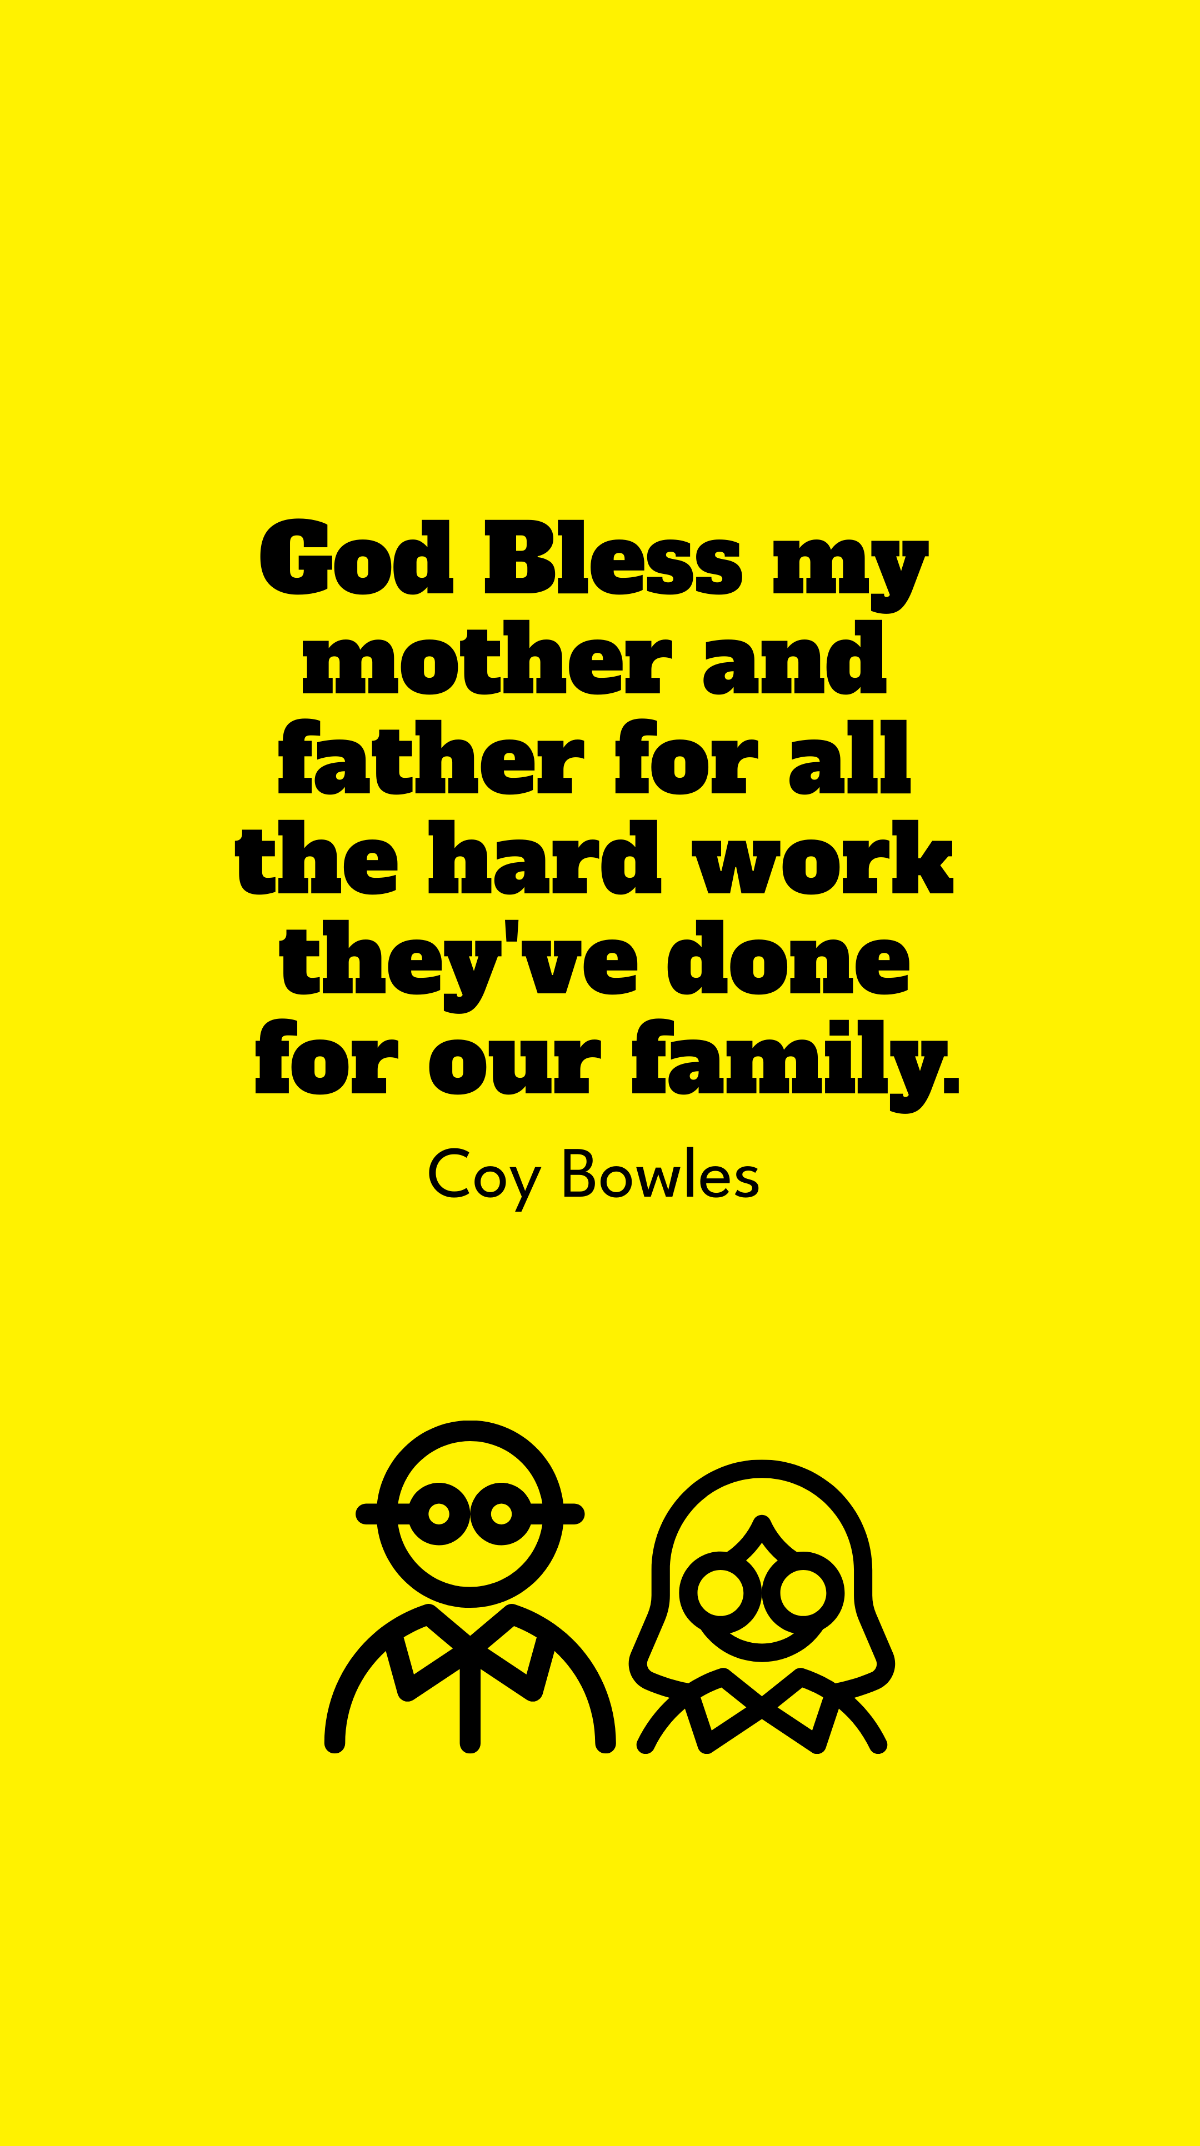 Free Coy Bowles - God Bless my mother and father for all the hard work they've done for our family. Template